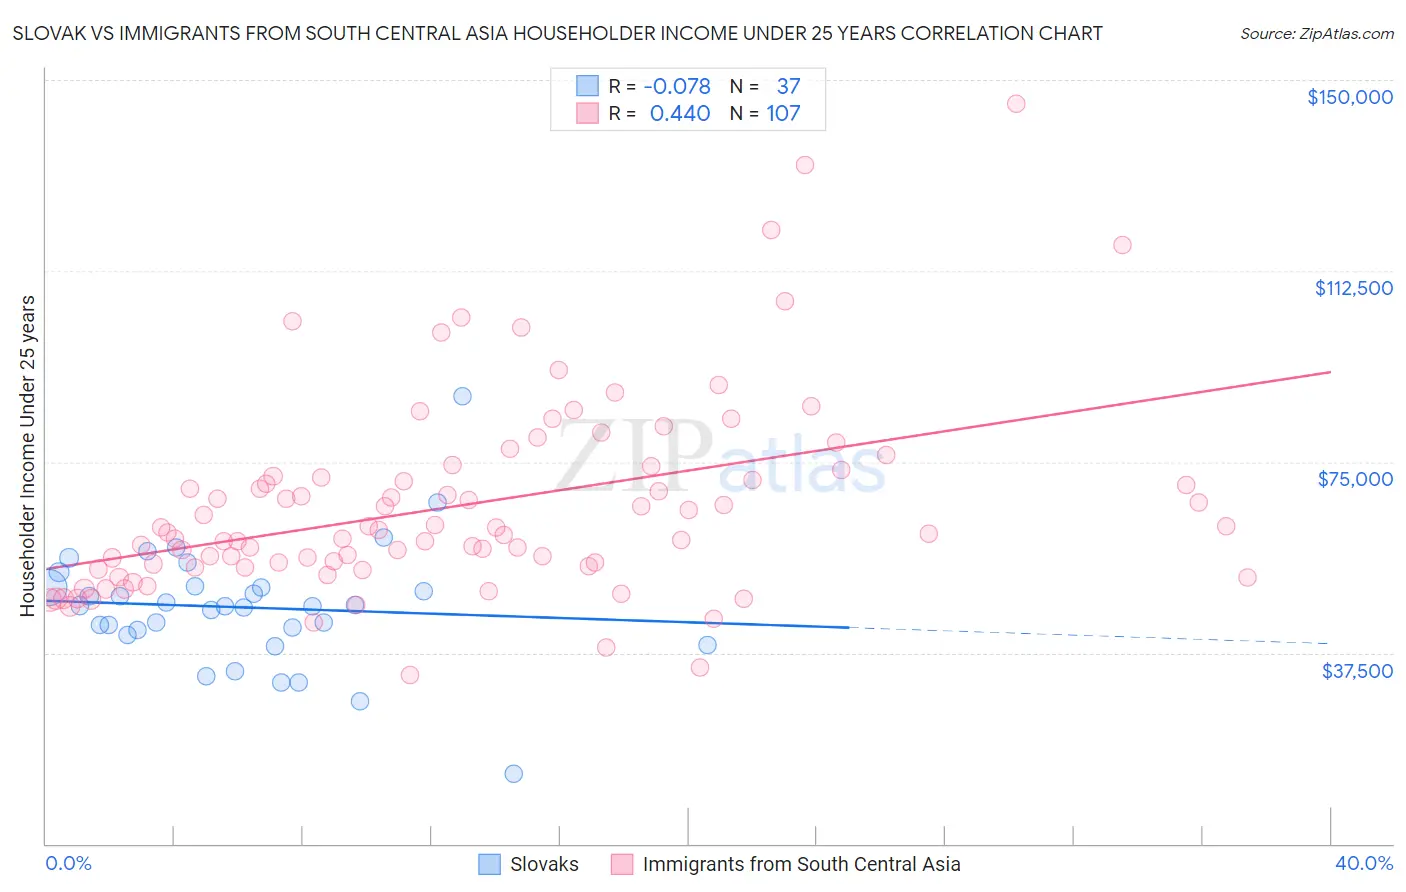 Slovak vs Immigrants from South Central Asia Householder Income Under 25 years